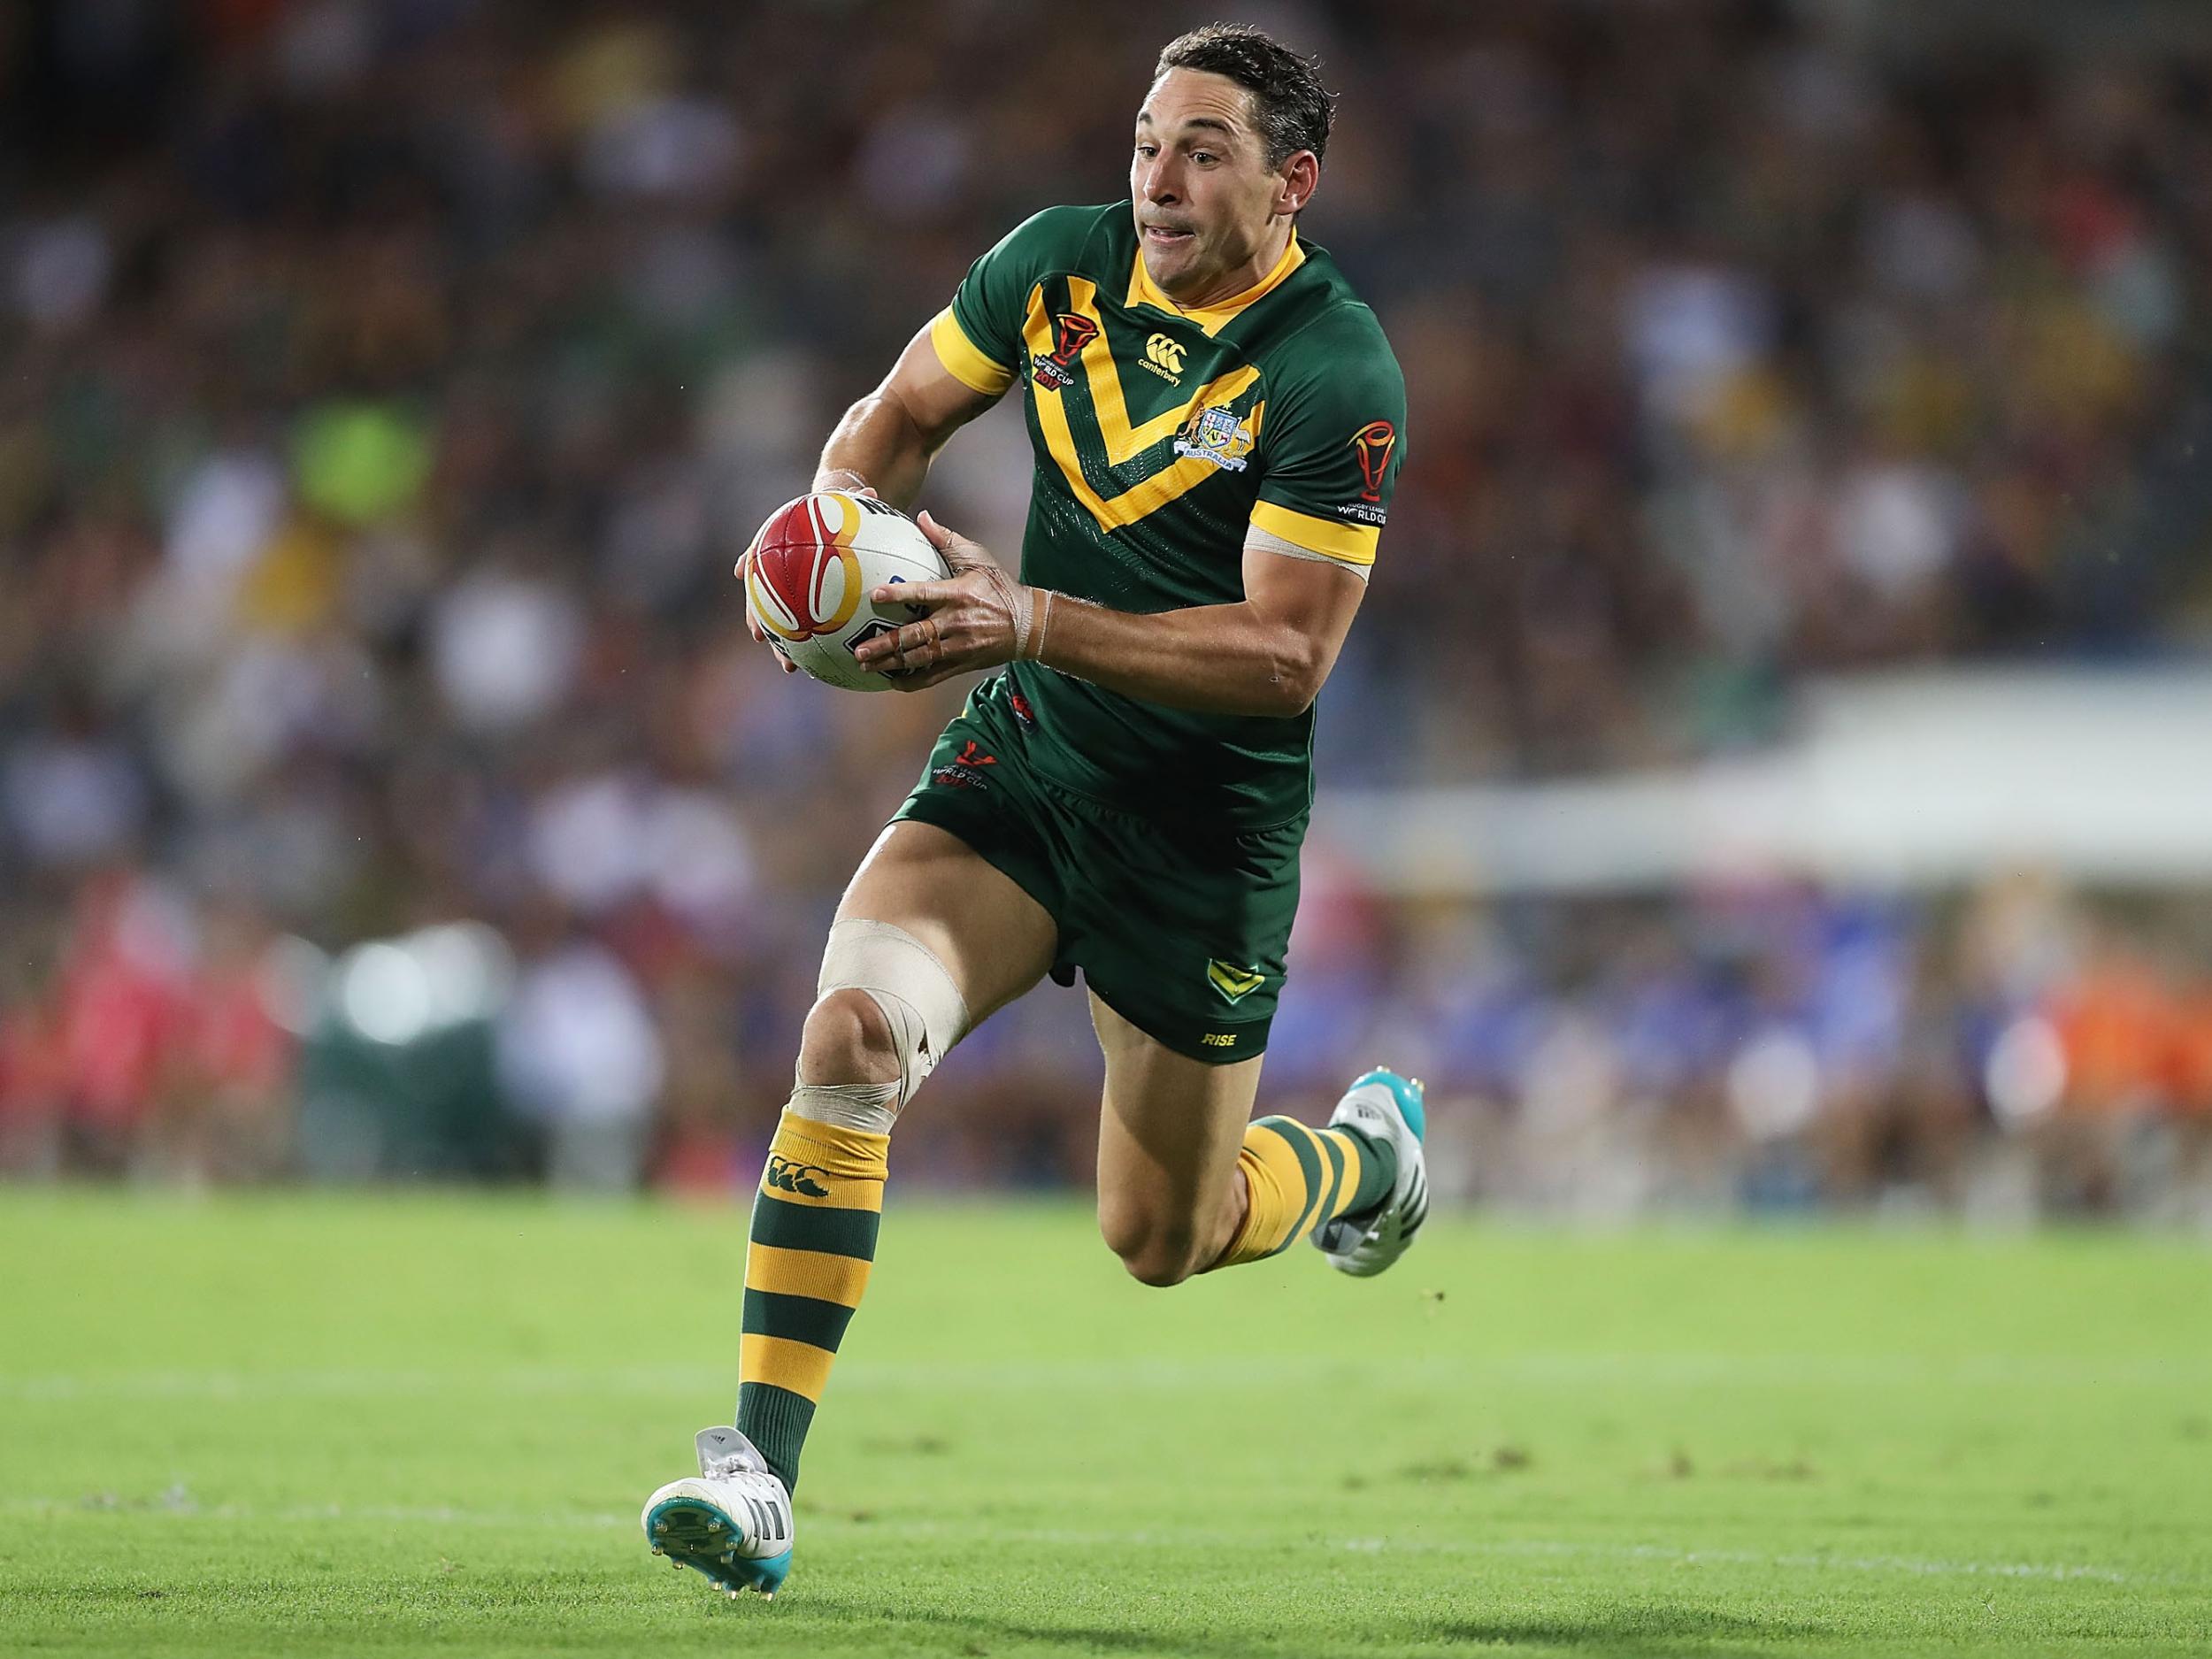 Billy Slater added to his collection of Australia tries